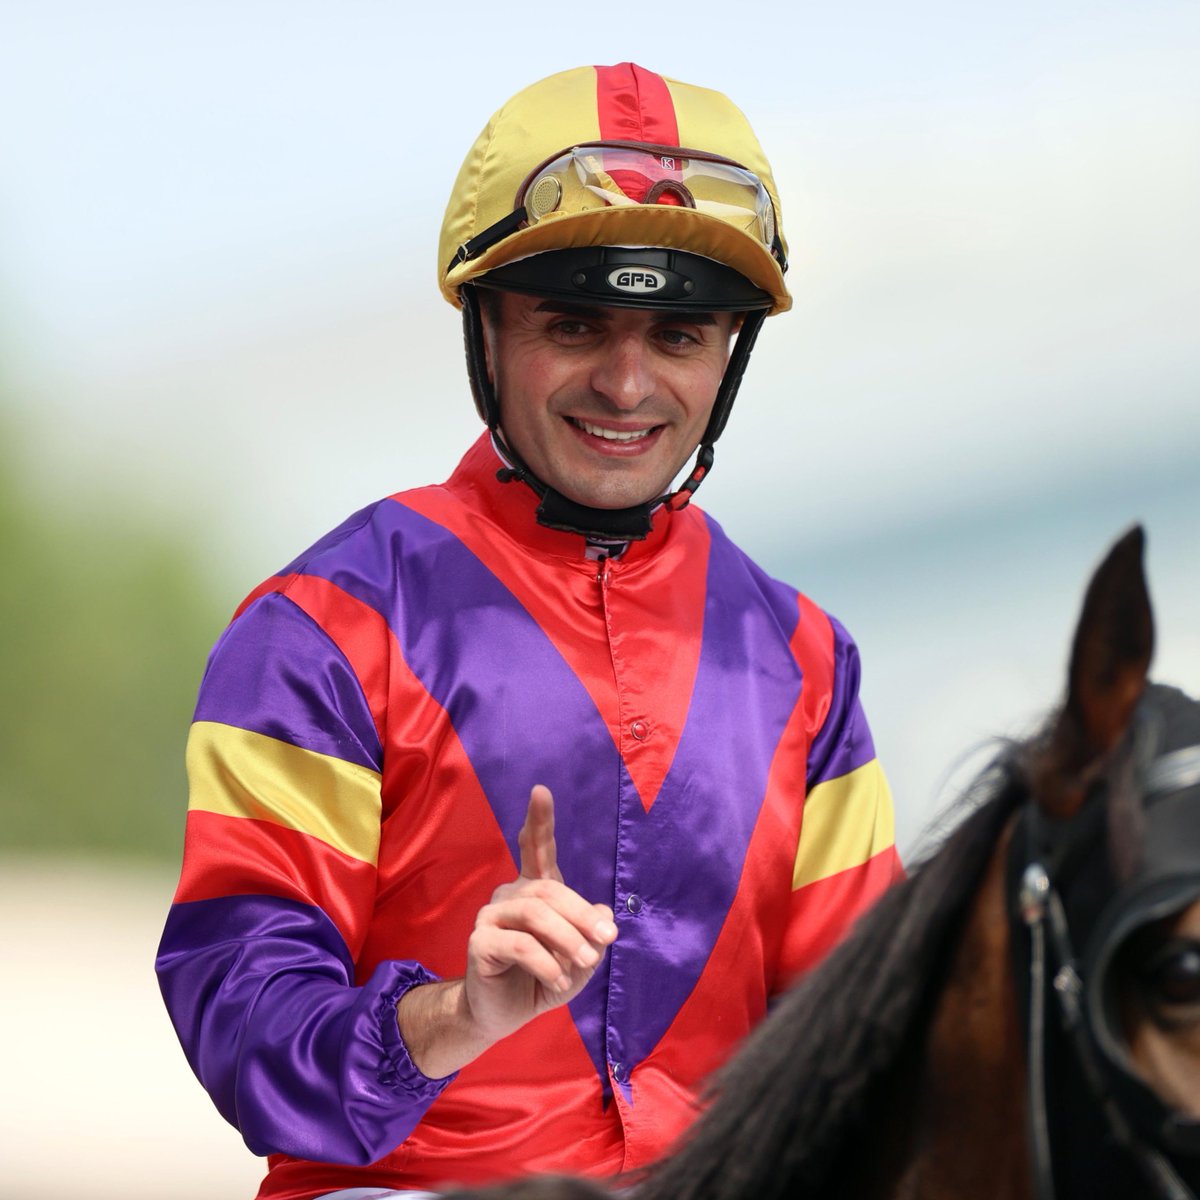 He’s magic you know! Another day, another HK double for @Atzenijockey. #HKRacing | @AtTheRaces